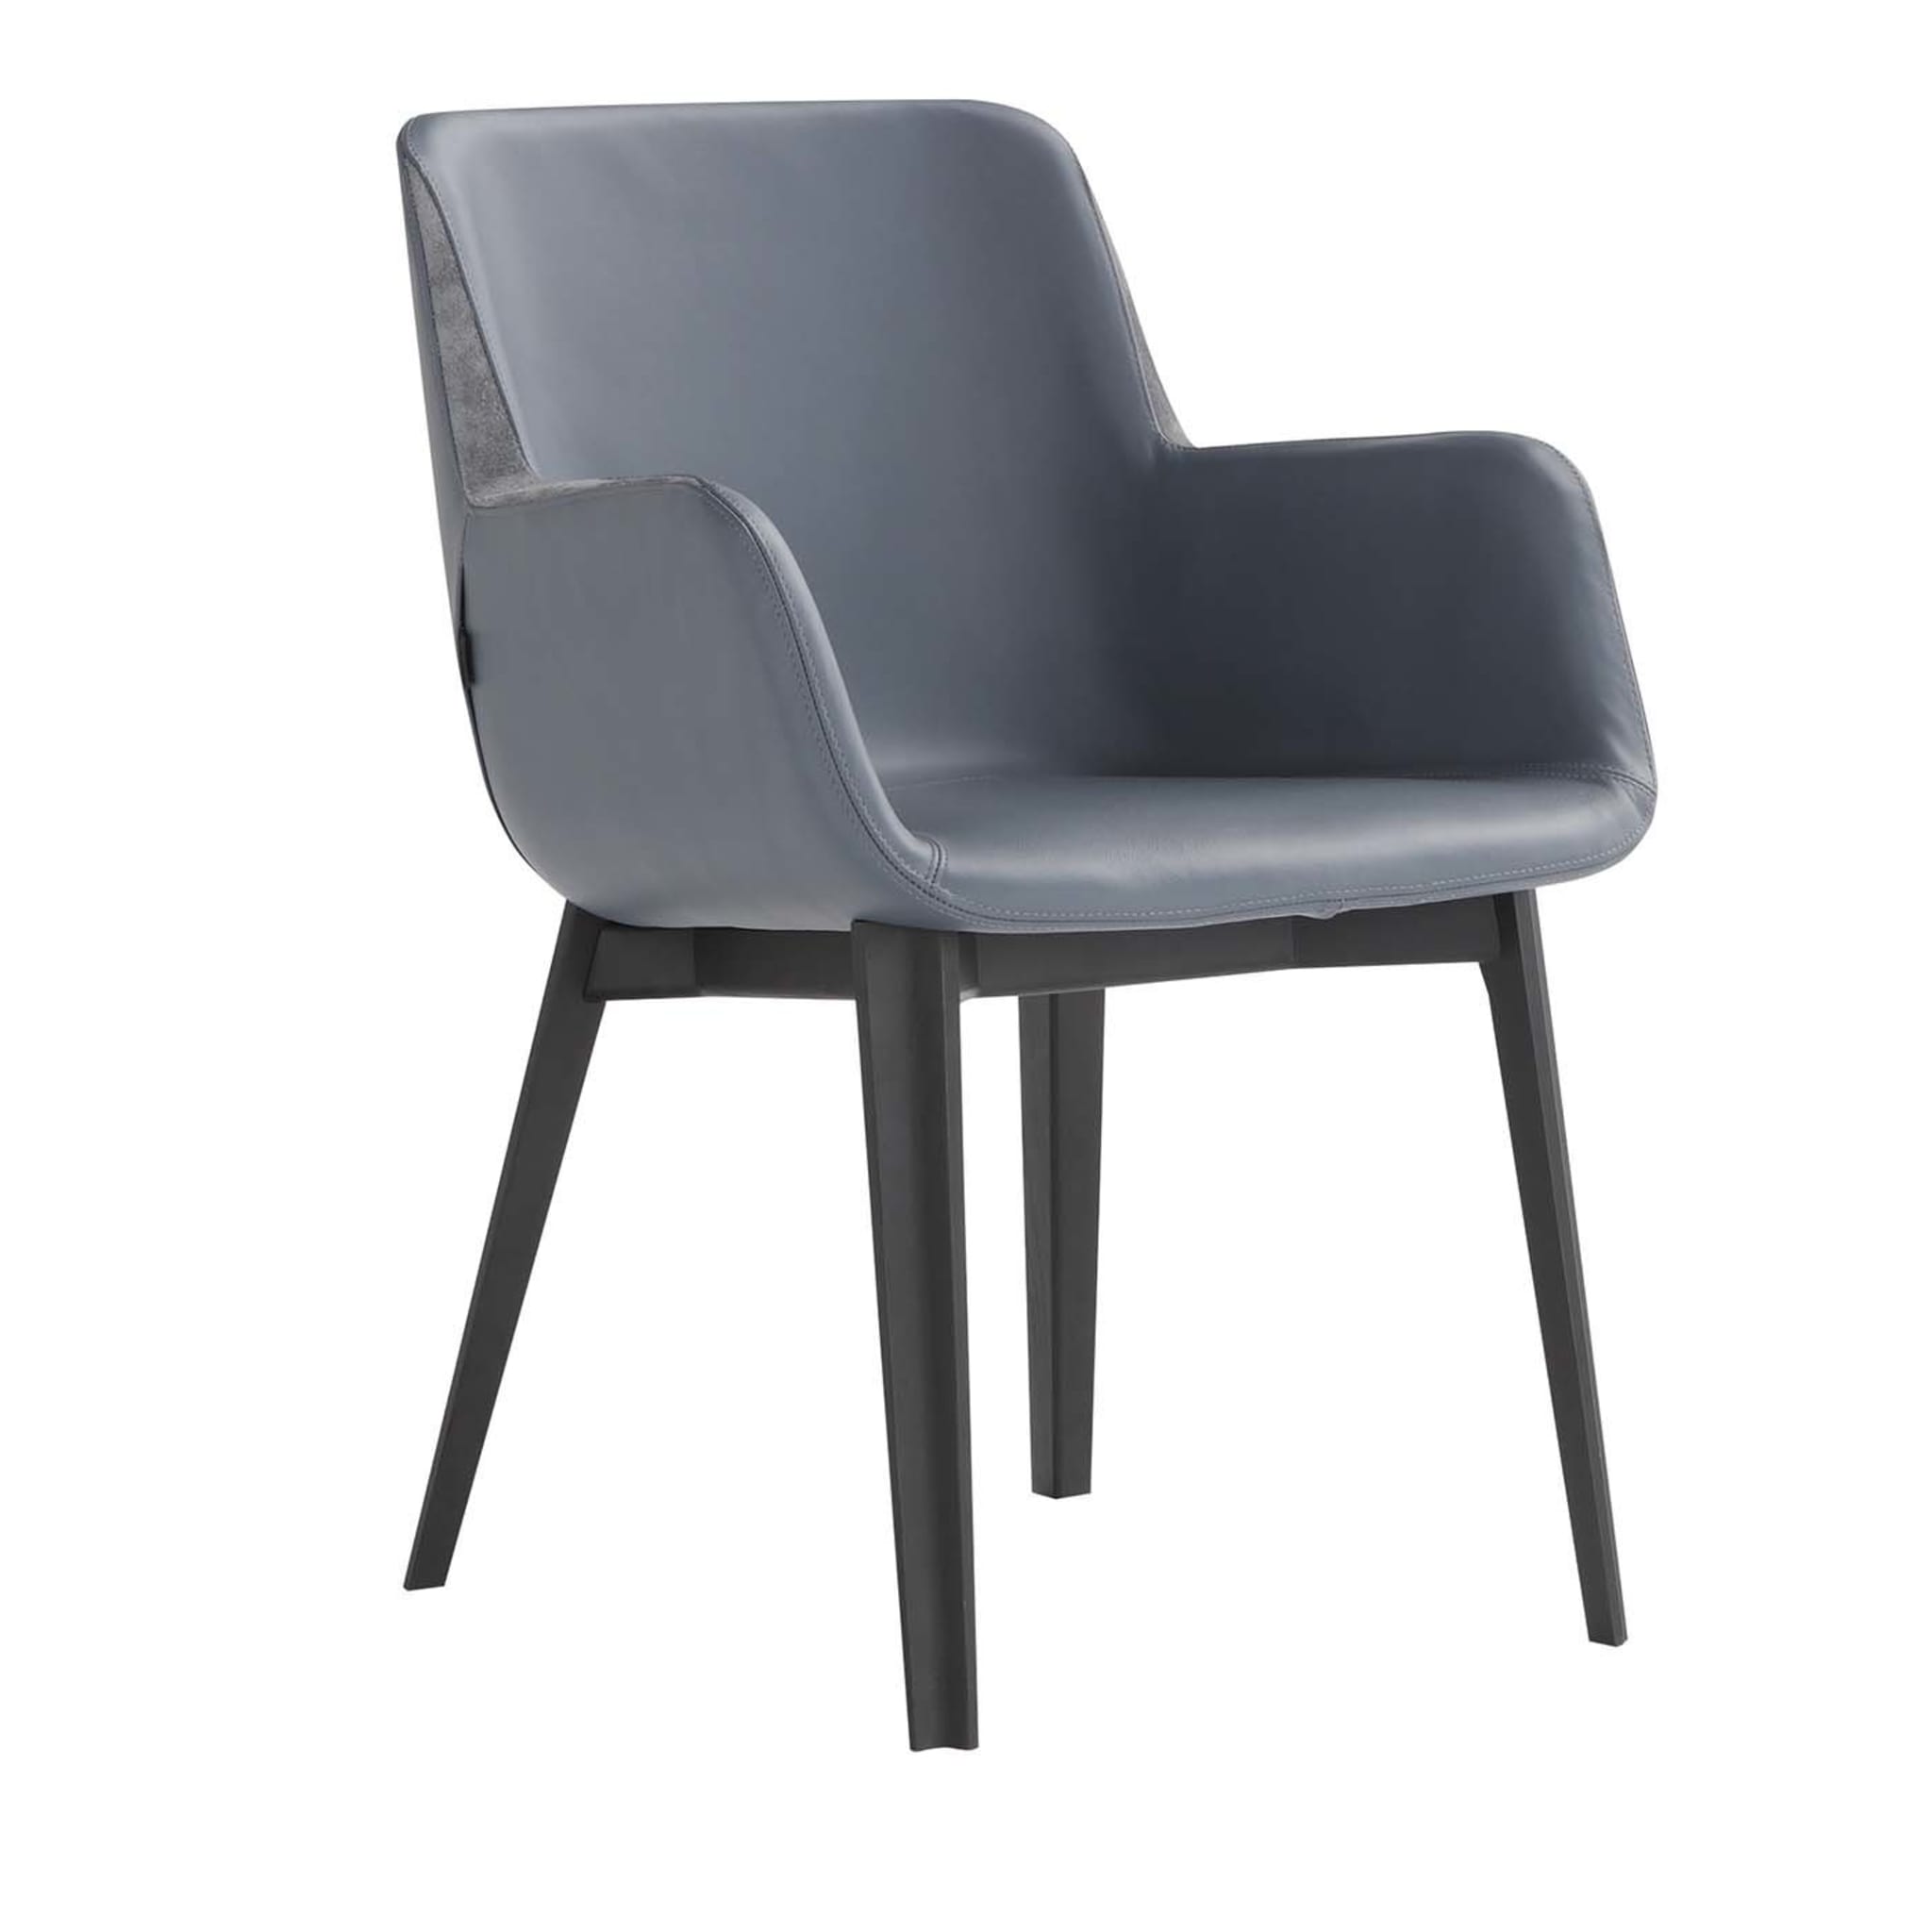 Panis Gray Leather Chair - Main view